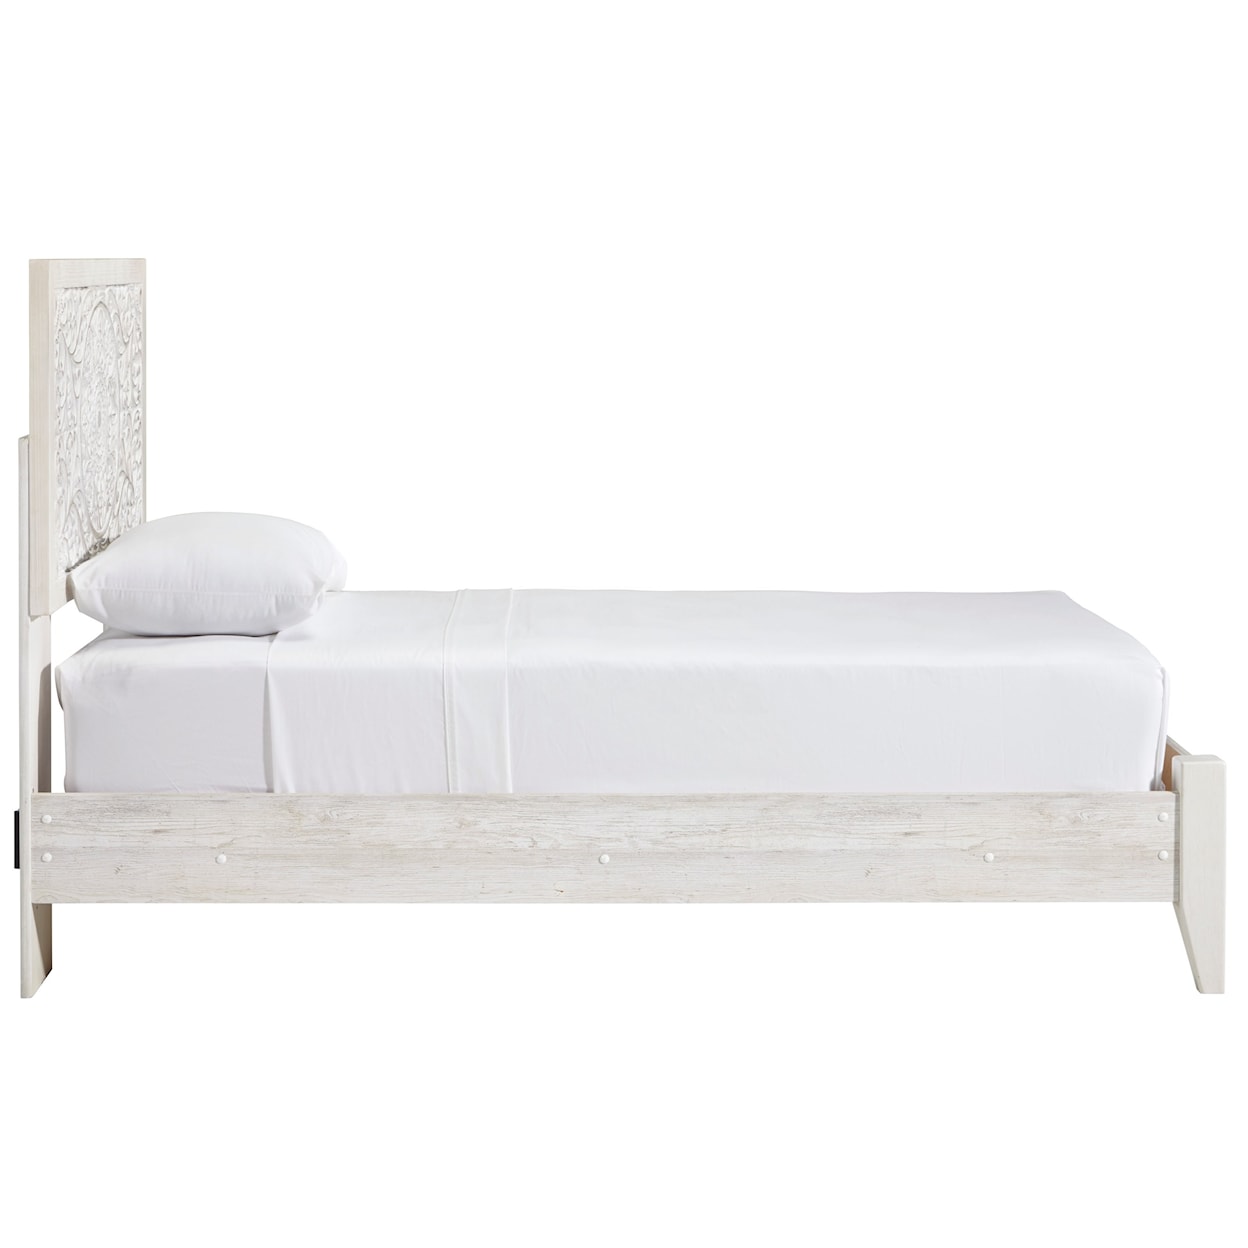 Michael Alan Select Paxberry Twin Panel Bed